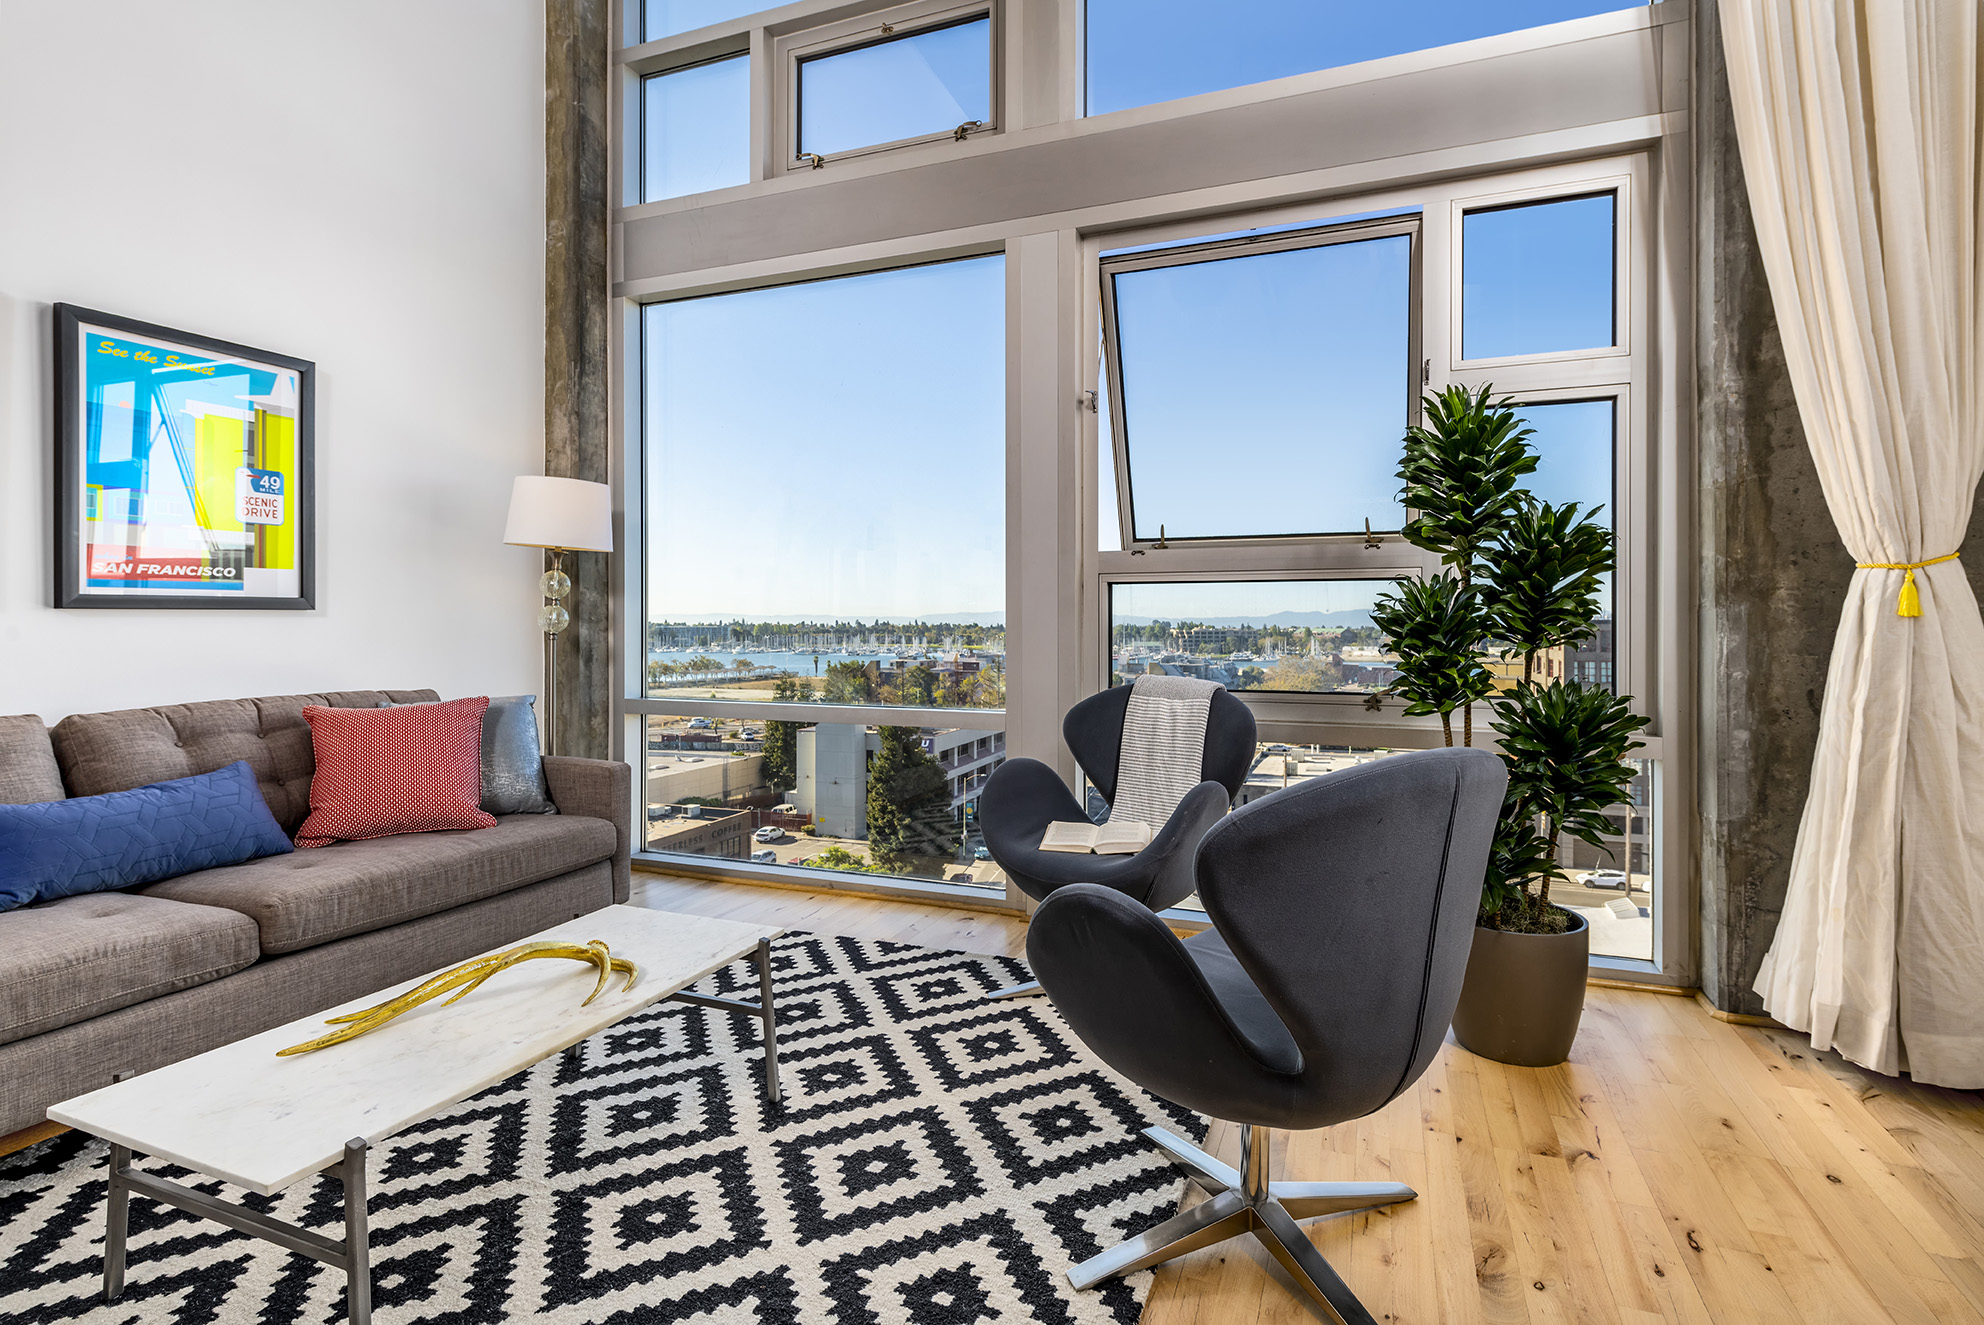 Oakland condo flat with large window bay views - real estate